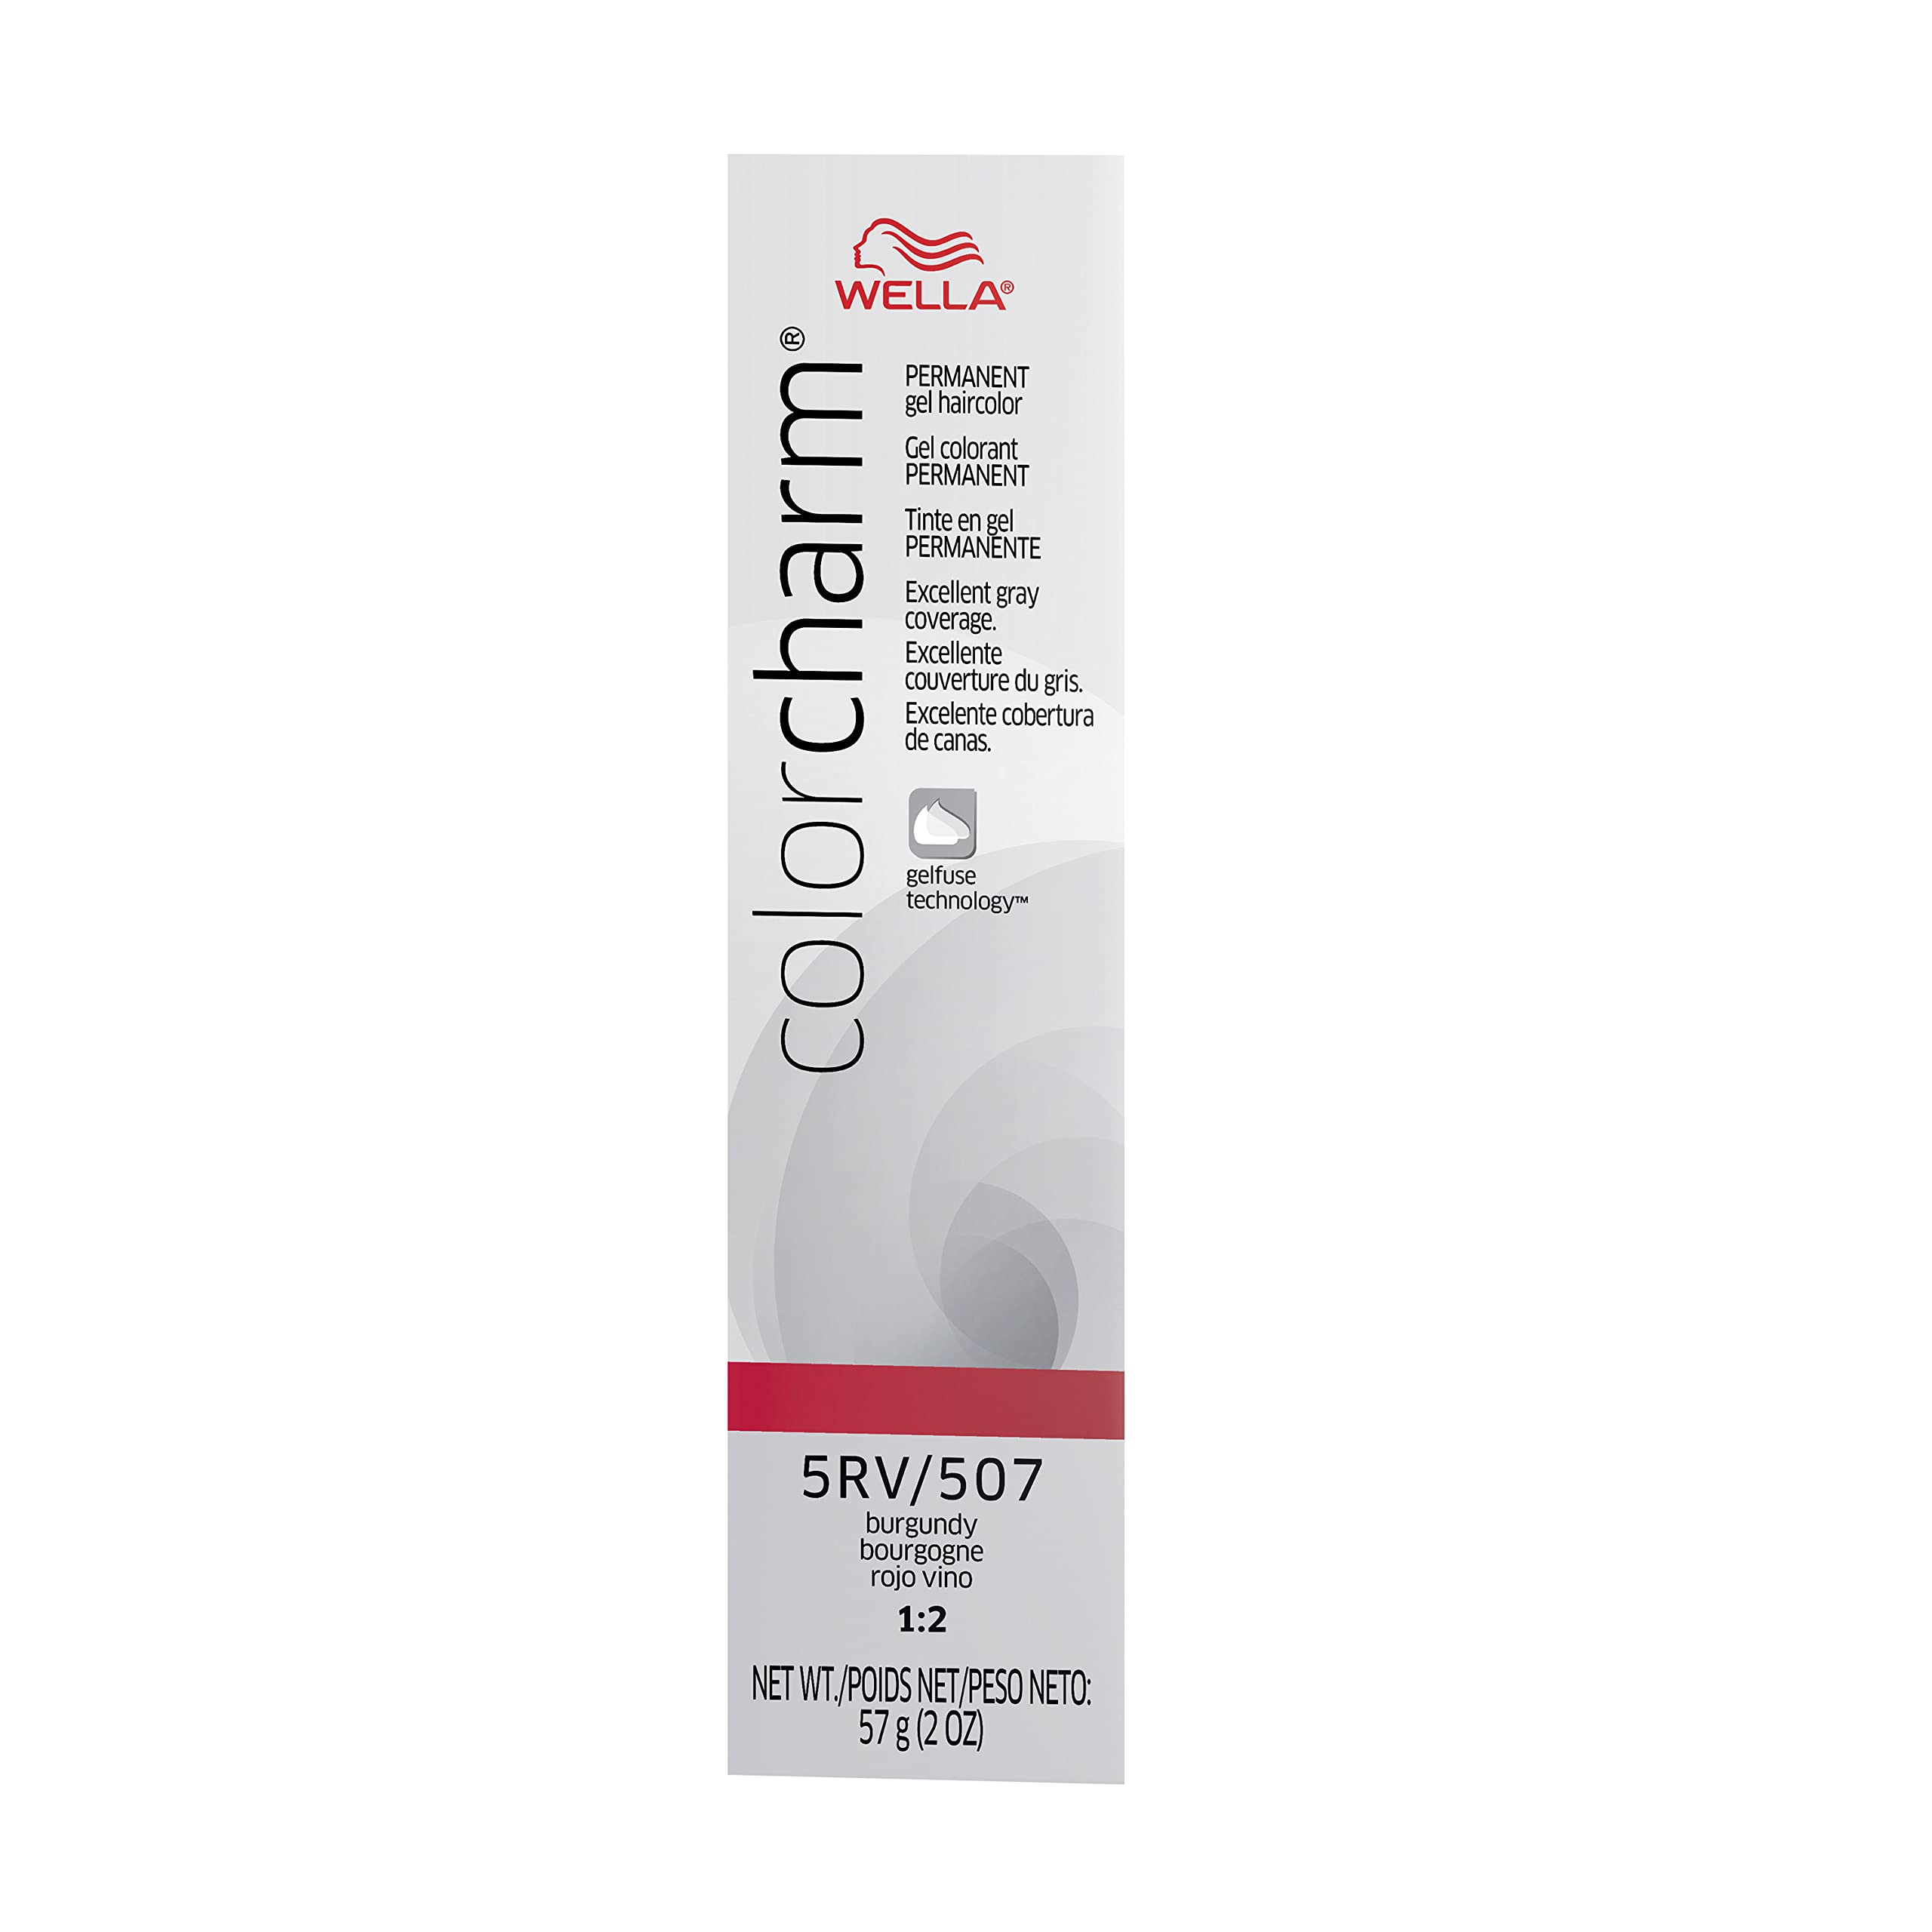 WELLA colorcharm Permanent Gel, Hair Color for Gray Coverage, 5RV Burgundy